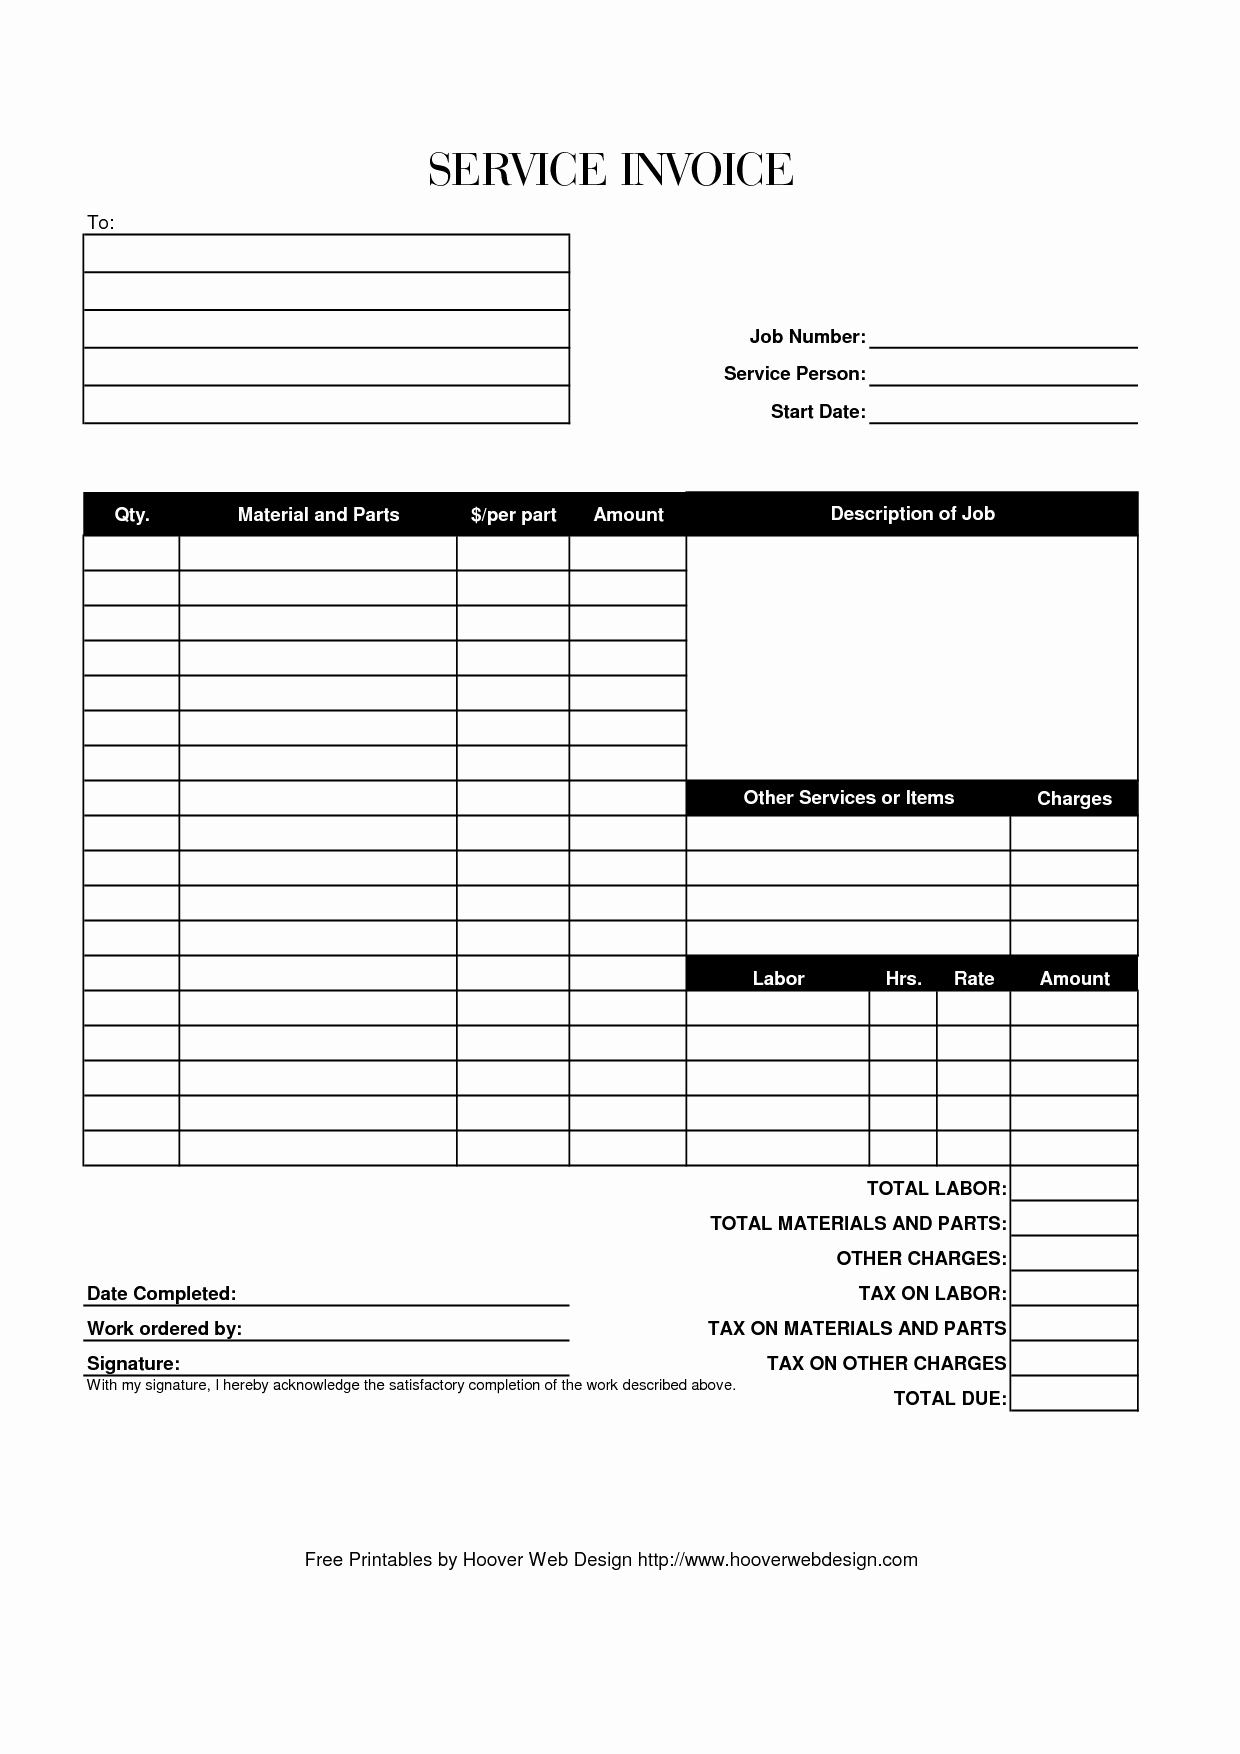 Printable Sales Receipt Pdf Awesome Hoover Receipts